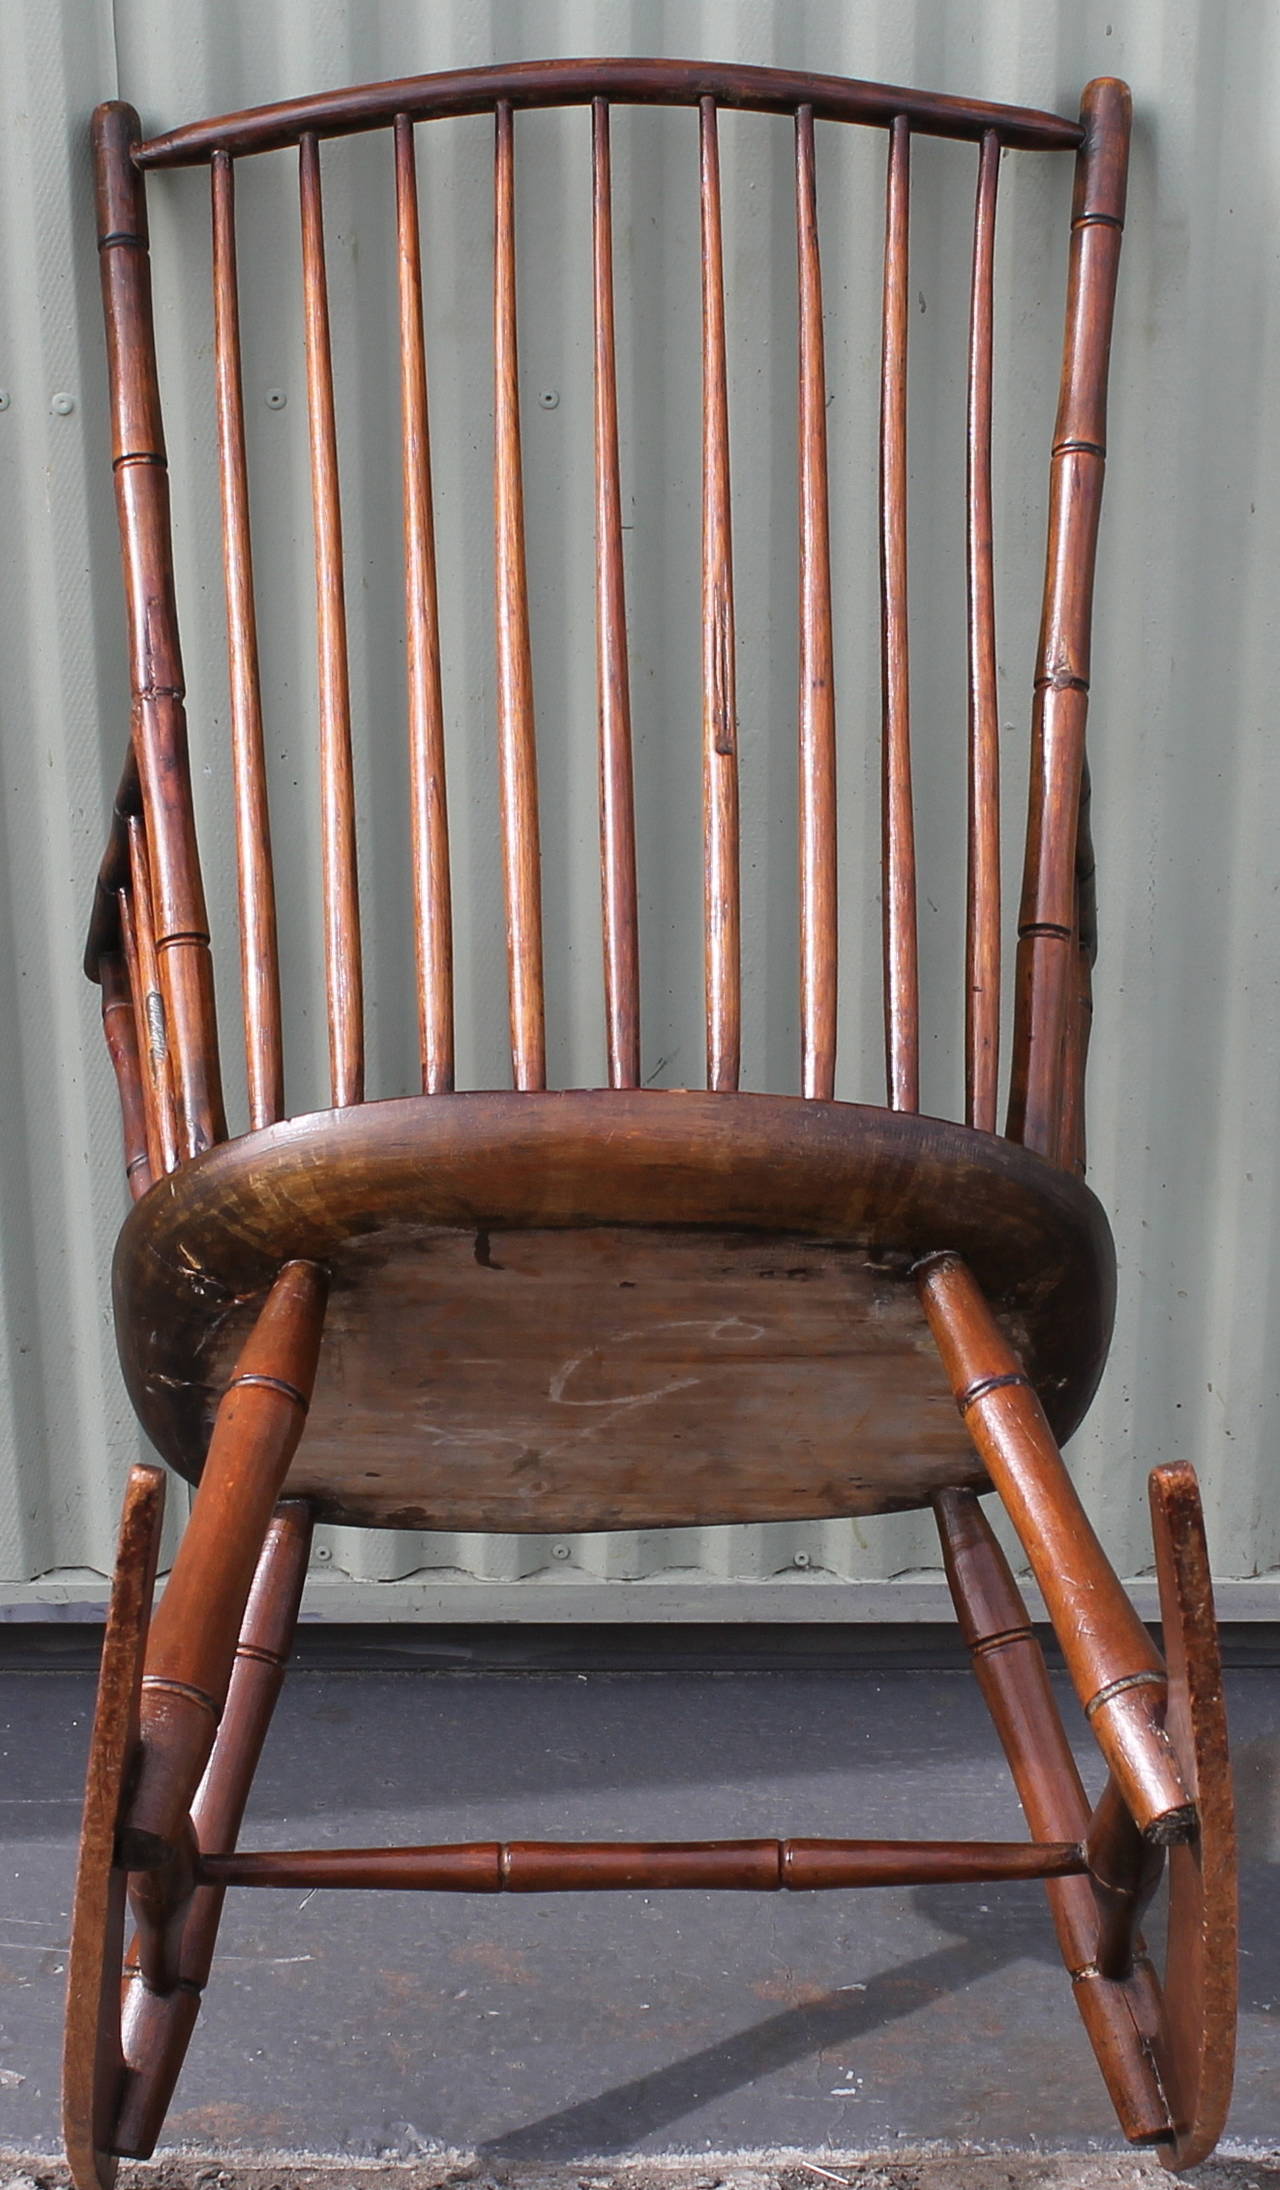 Wood 19th Century Windsor Rocking Chair from Pennsylvania